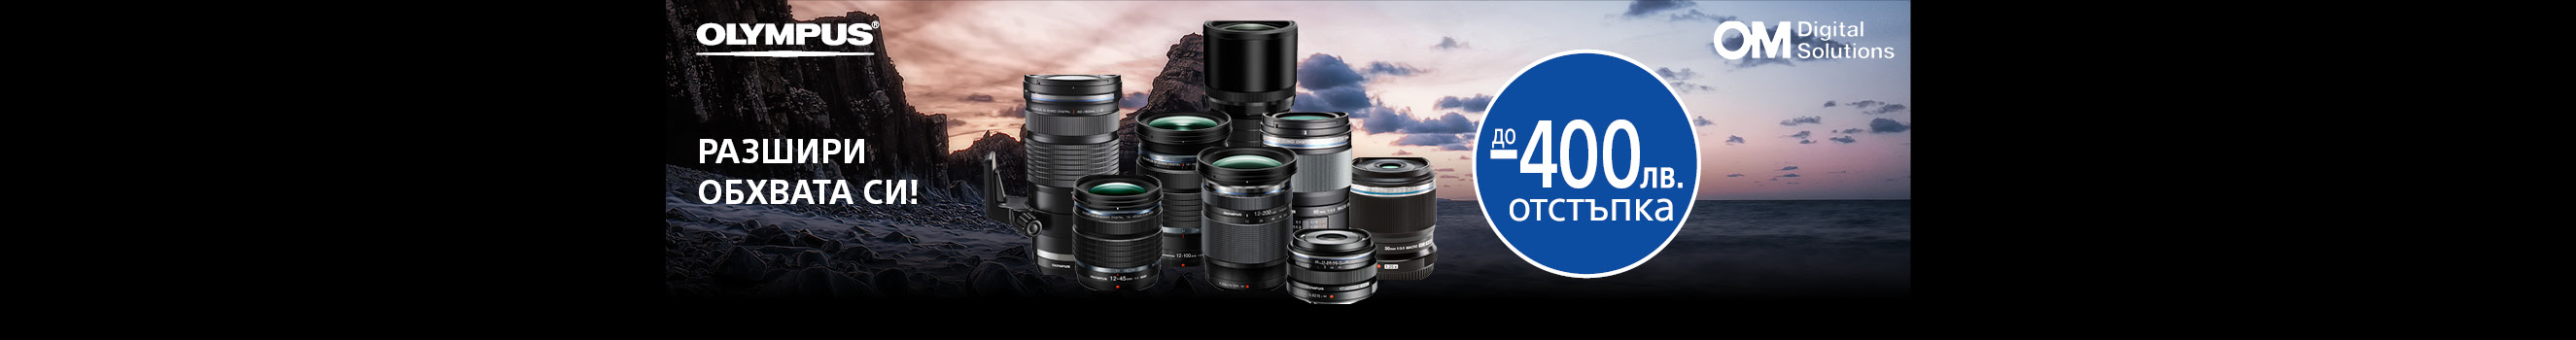  Up to -400 BGN for selected Olympus lenses in PhotoSynthesis stores